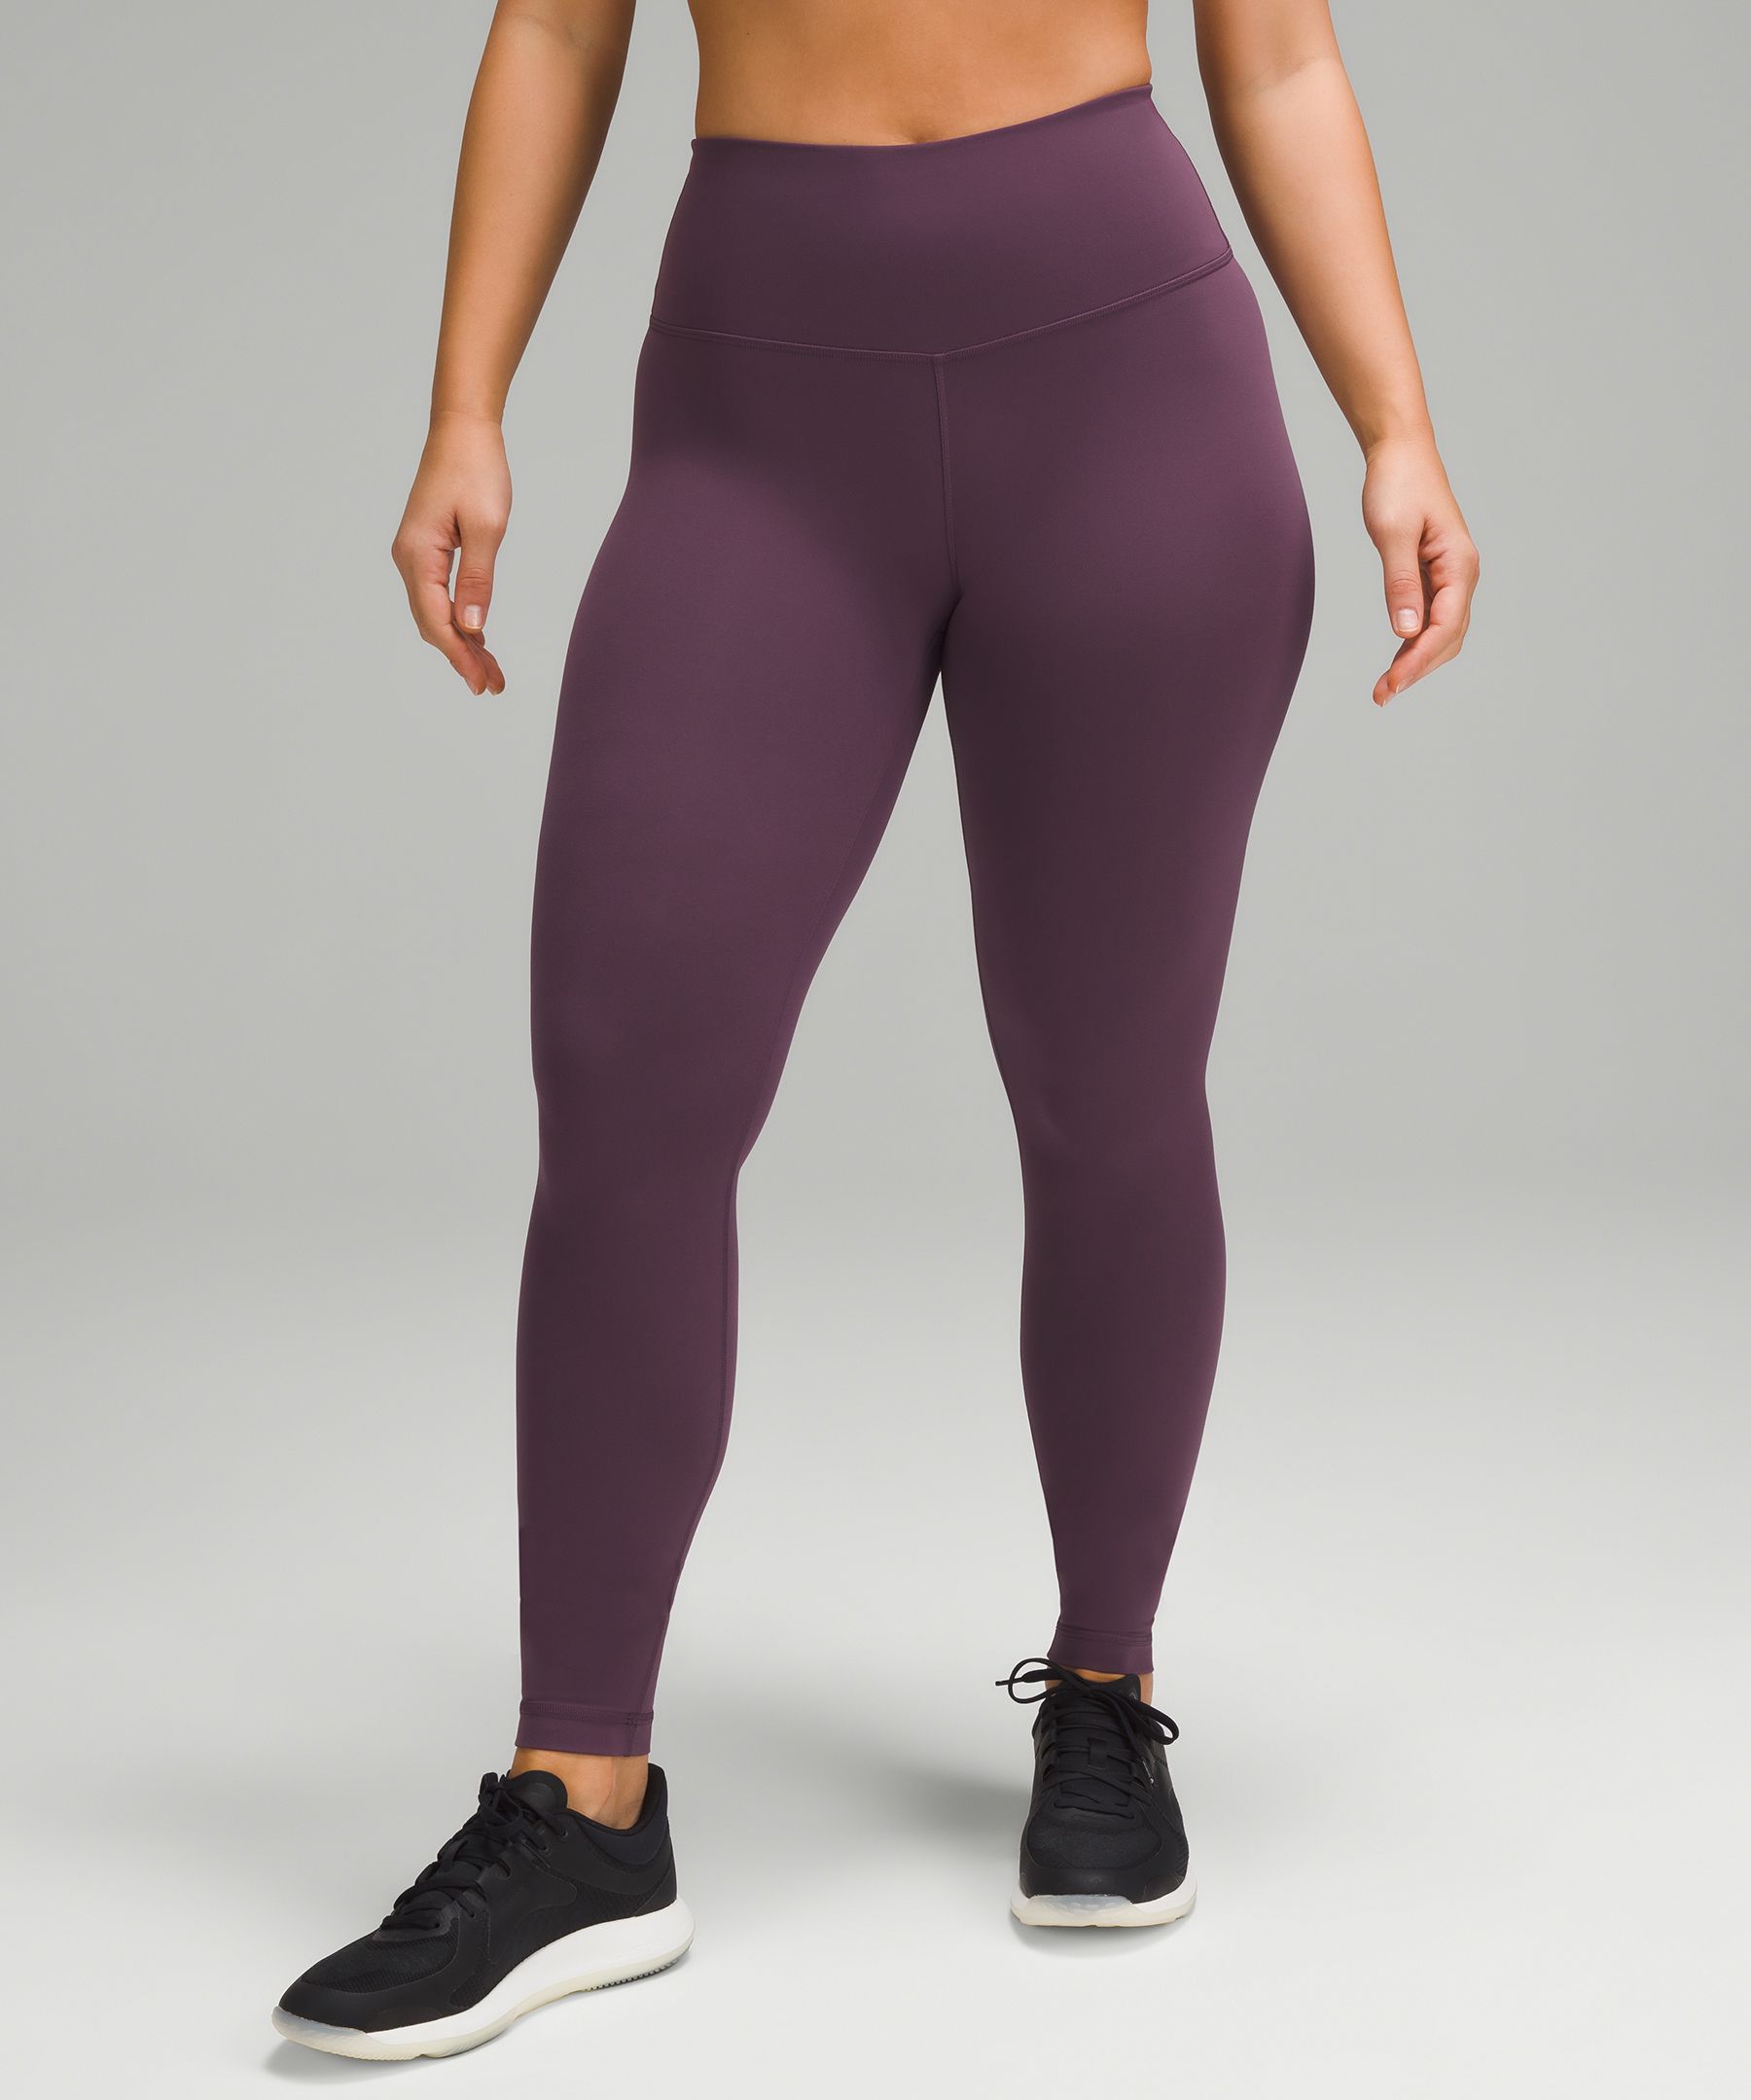 Wunder Train Contour Fit High-Rise Tight 28, Women's Leggings/Tights